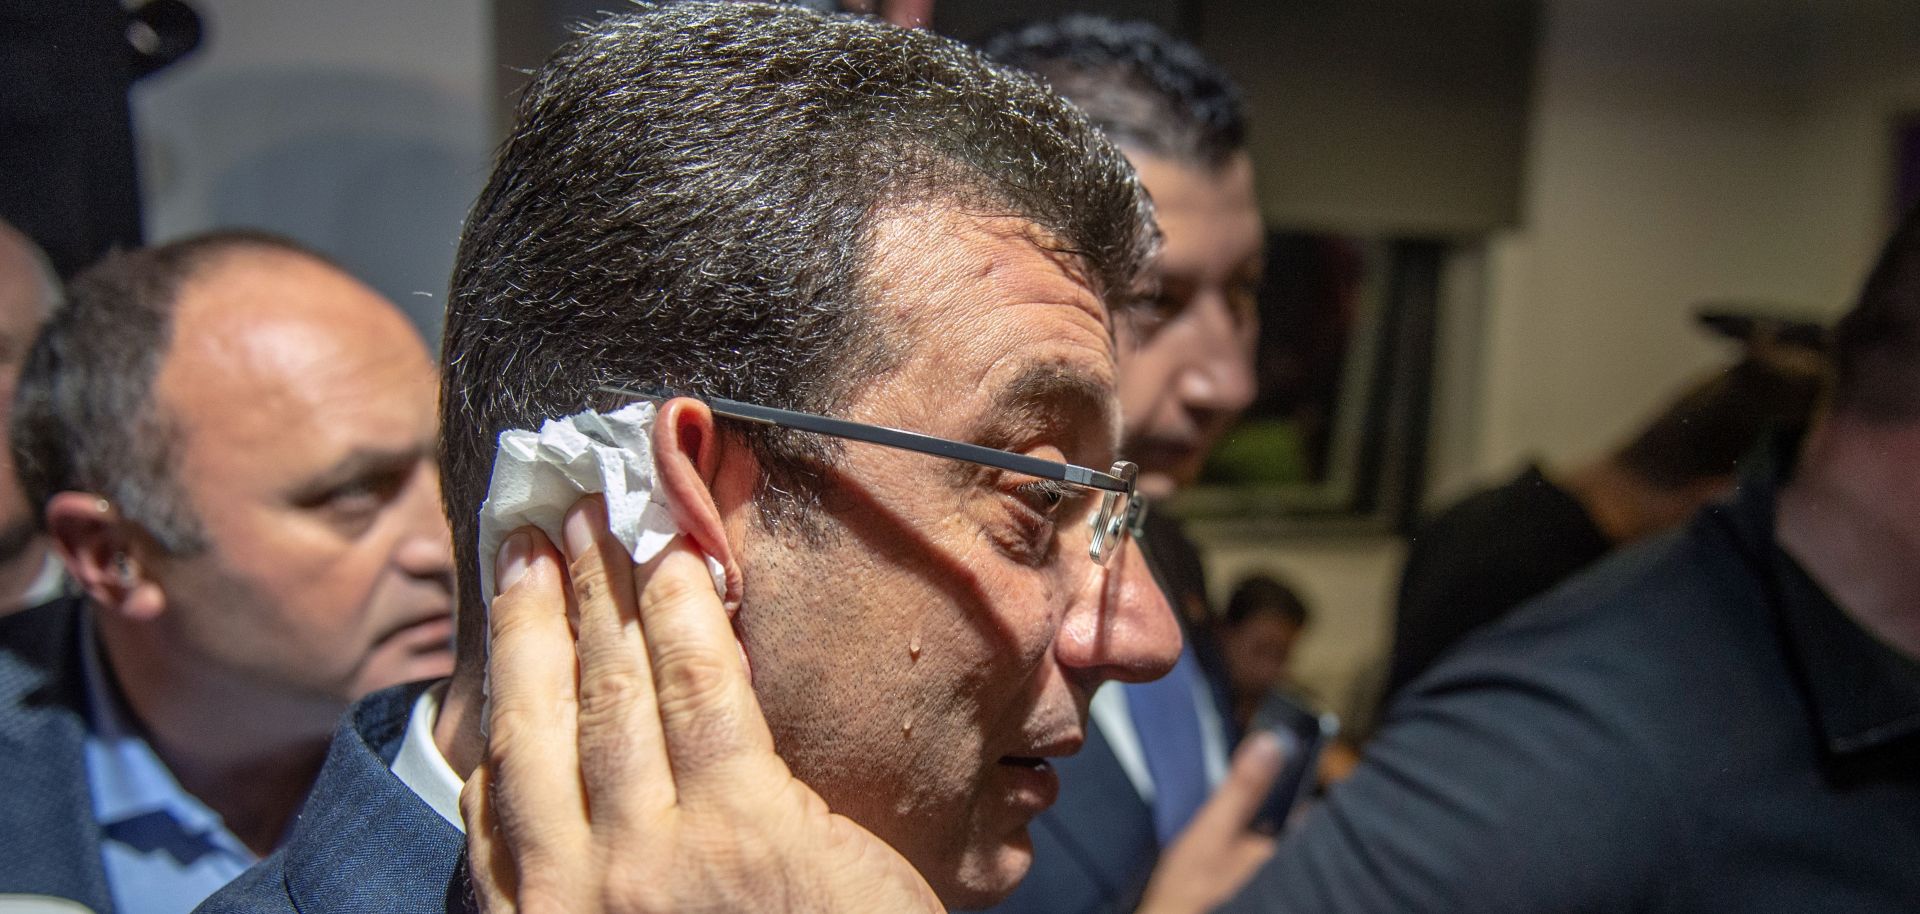 Sweat drips down the face of Ekrem Imamoglu during a news conference in Istanbul on April 9, 2019. On April 17, Imamoglu finally received the mandate to become mayor of Istanbul, more than two weeks after he won local elections.